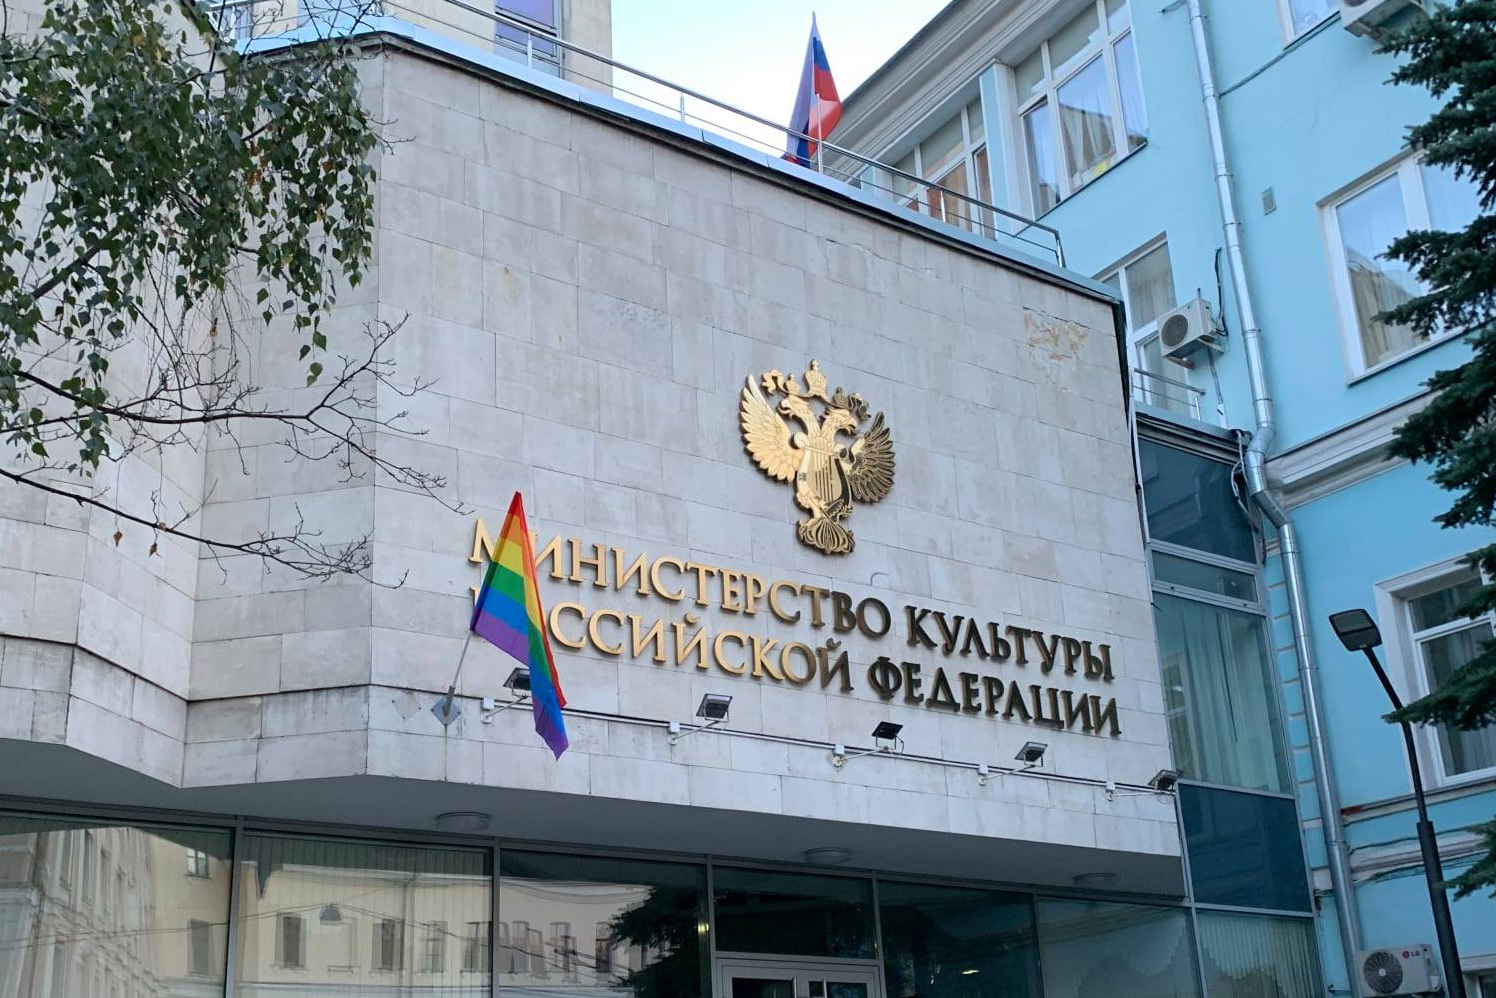 Russian government building LGBT rainbow flag